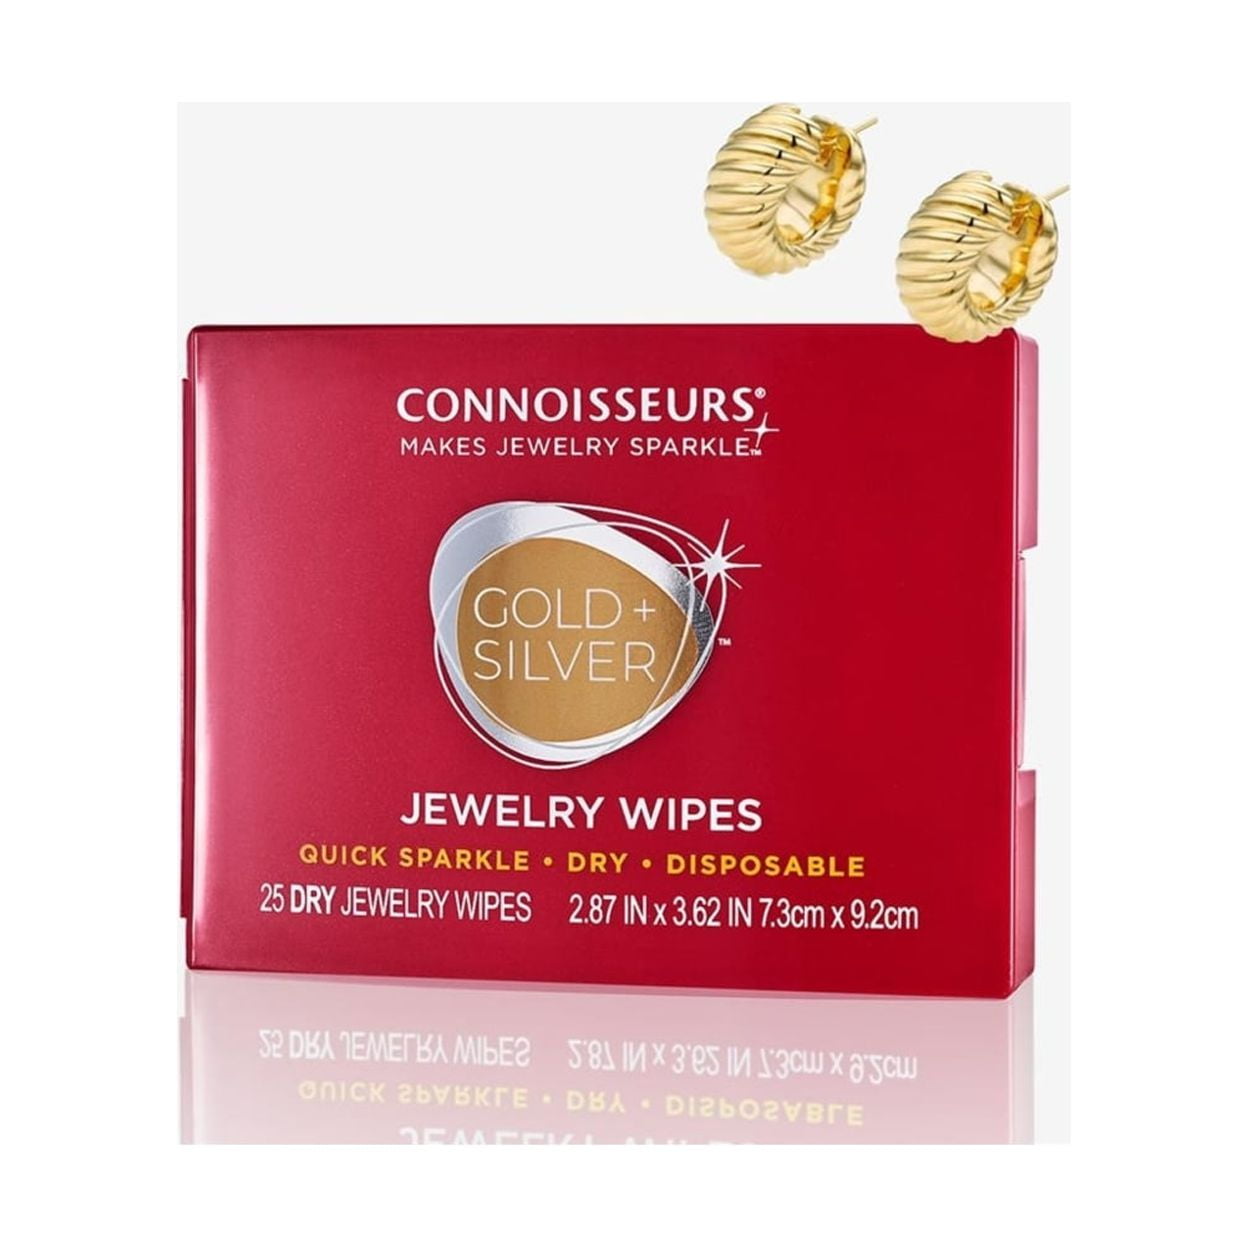 Refreshing Wholesale golds wipes For All Ages And Routines